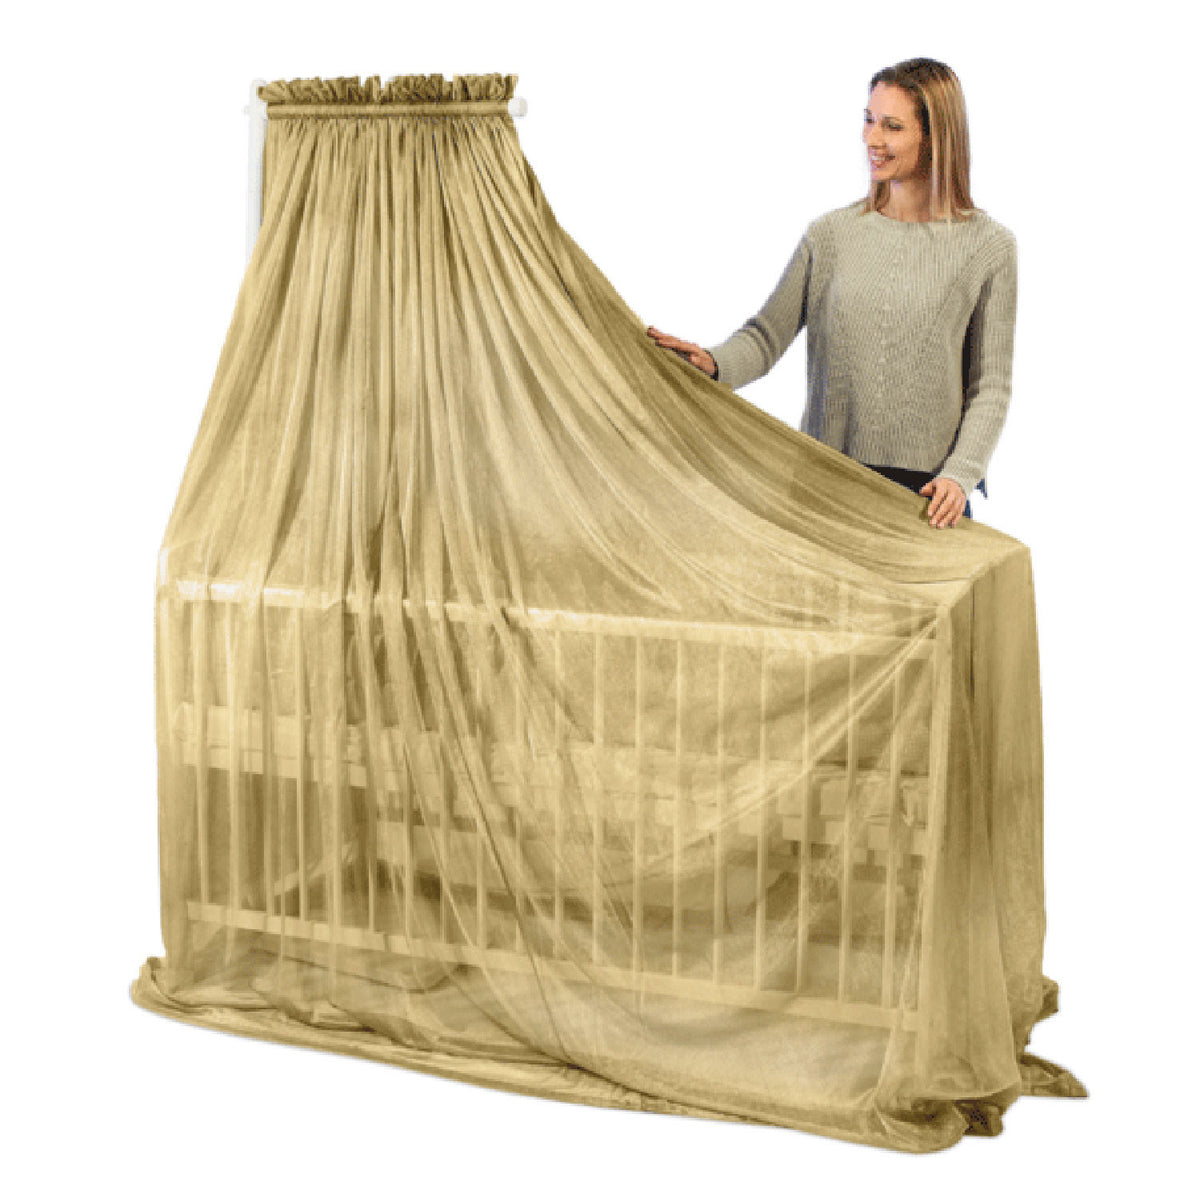 GOLDKIND PRO® Shielding Canopy for Baby Bed (natural beechwood stand)